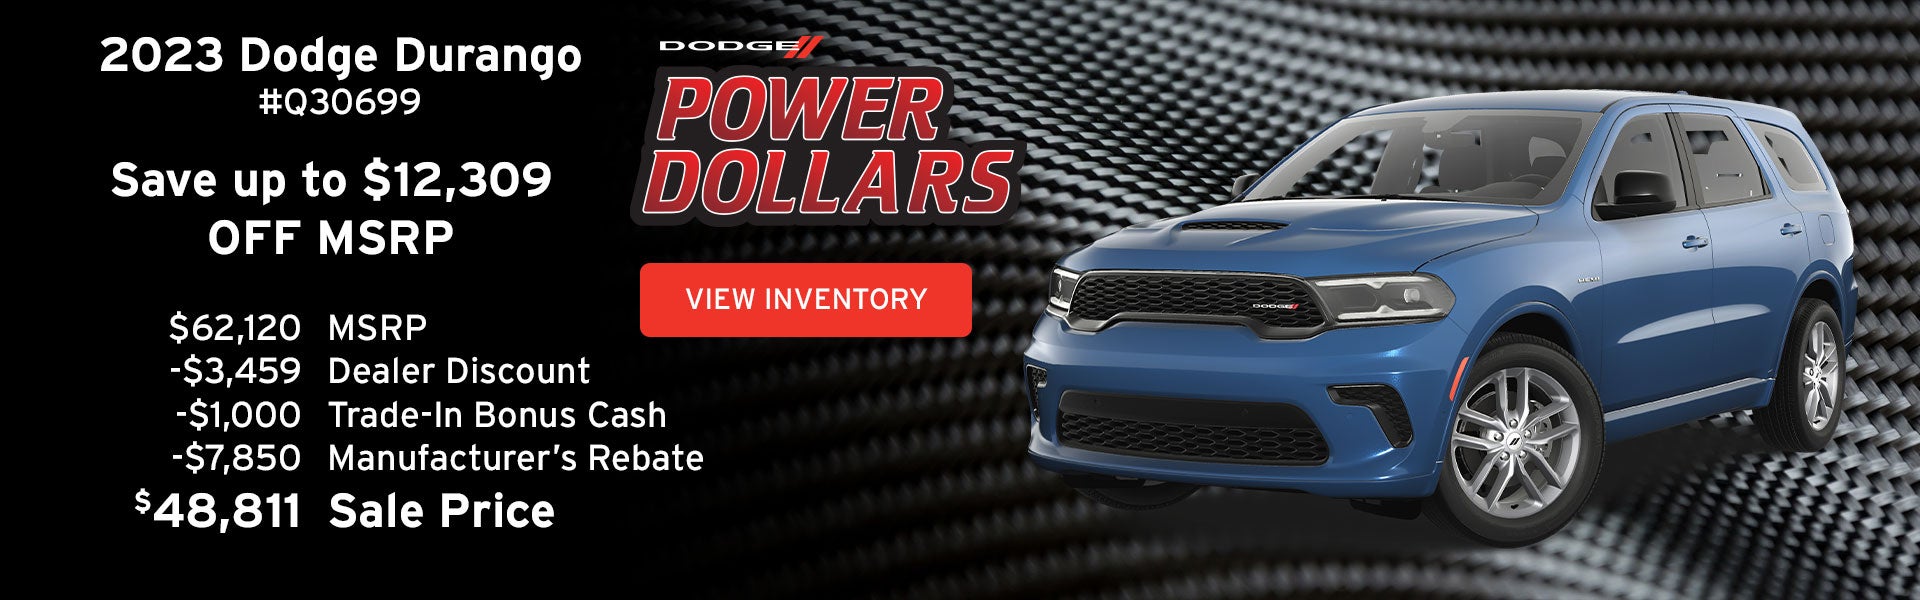 Save up to $12,309 on a New Dodge Durango